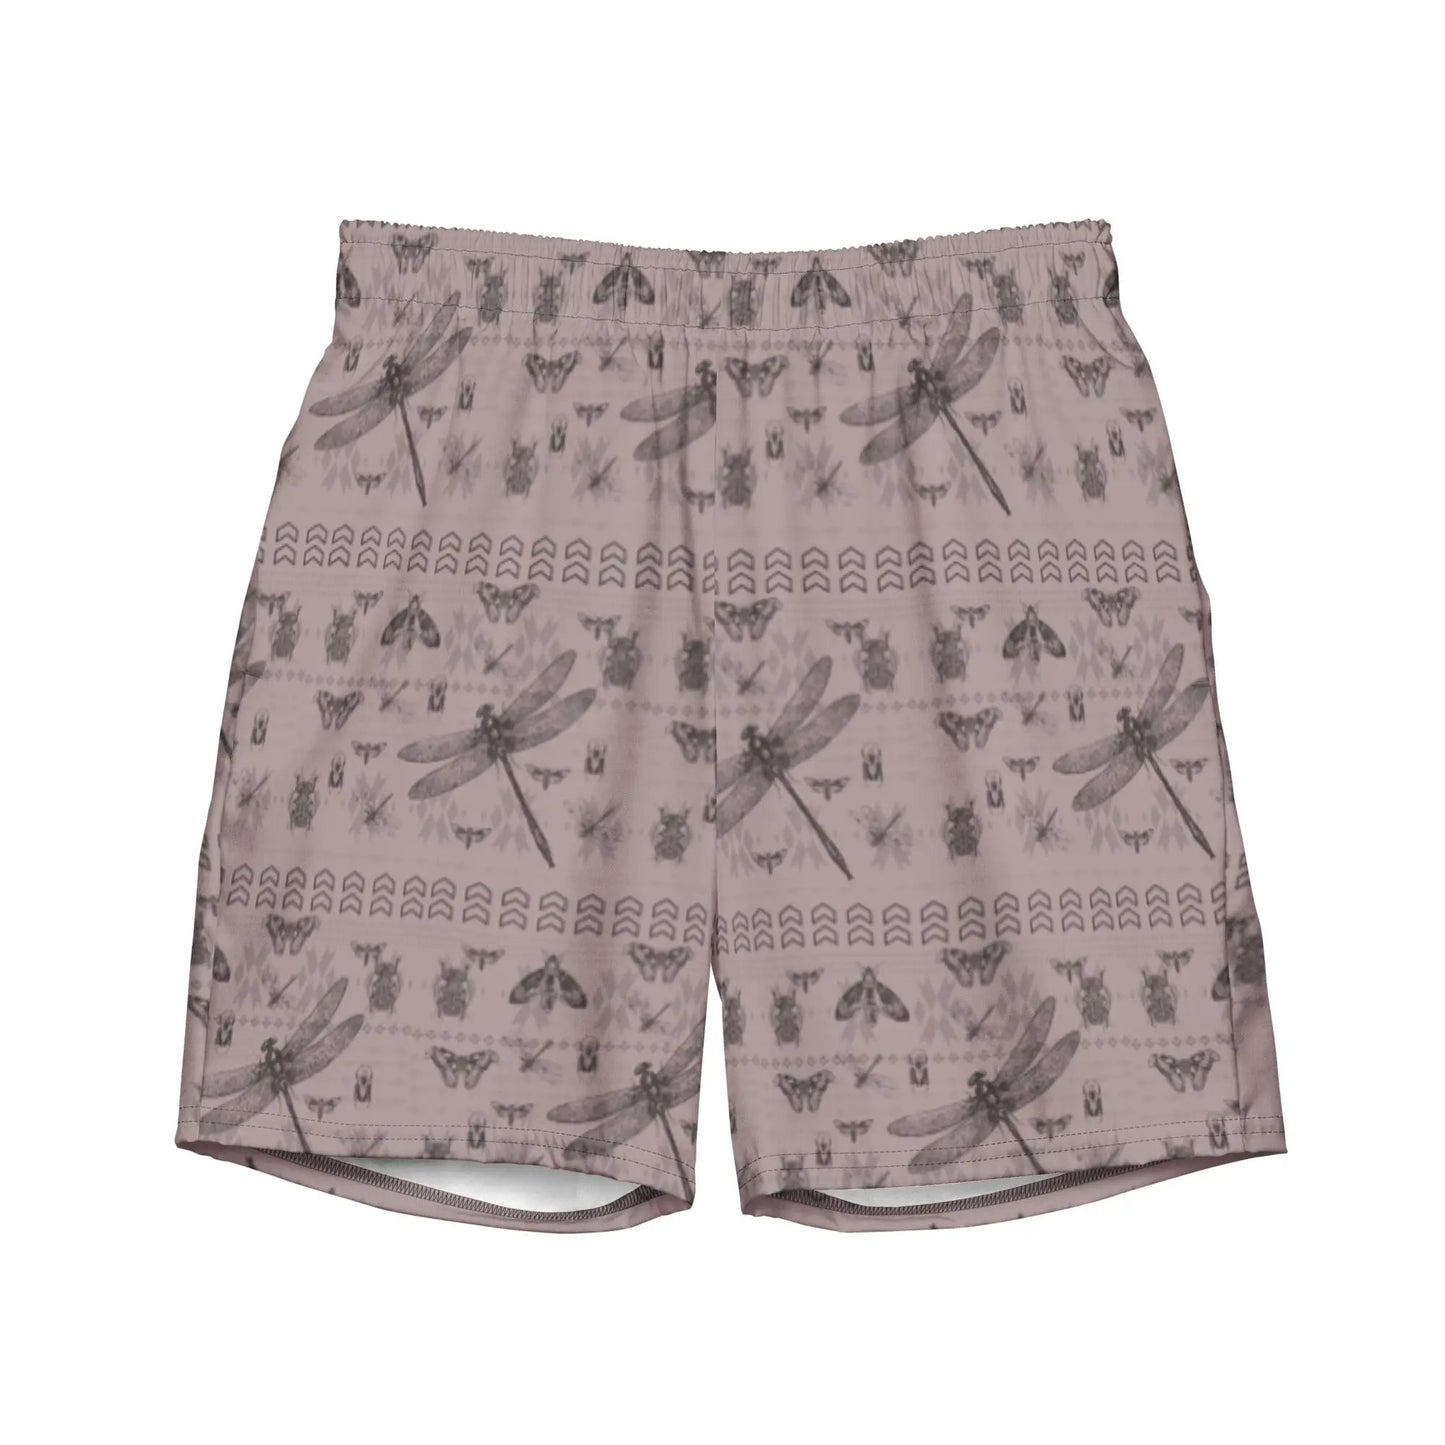 Botanical Bugs Nature Recycled SWIM 7" QUICK DRY Shorts with liner - Appalachian Bittersweet - Shorts